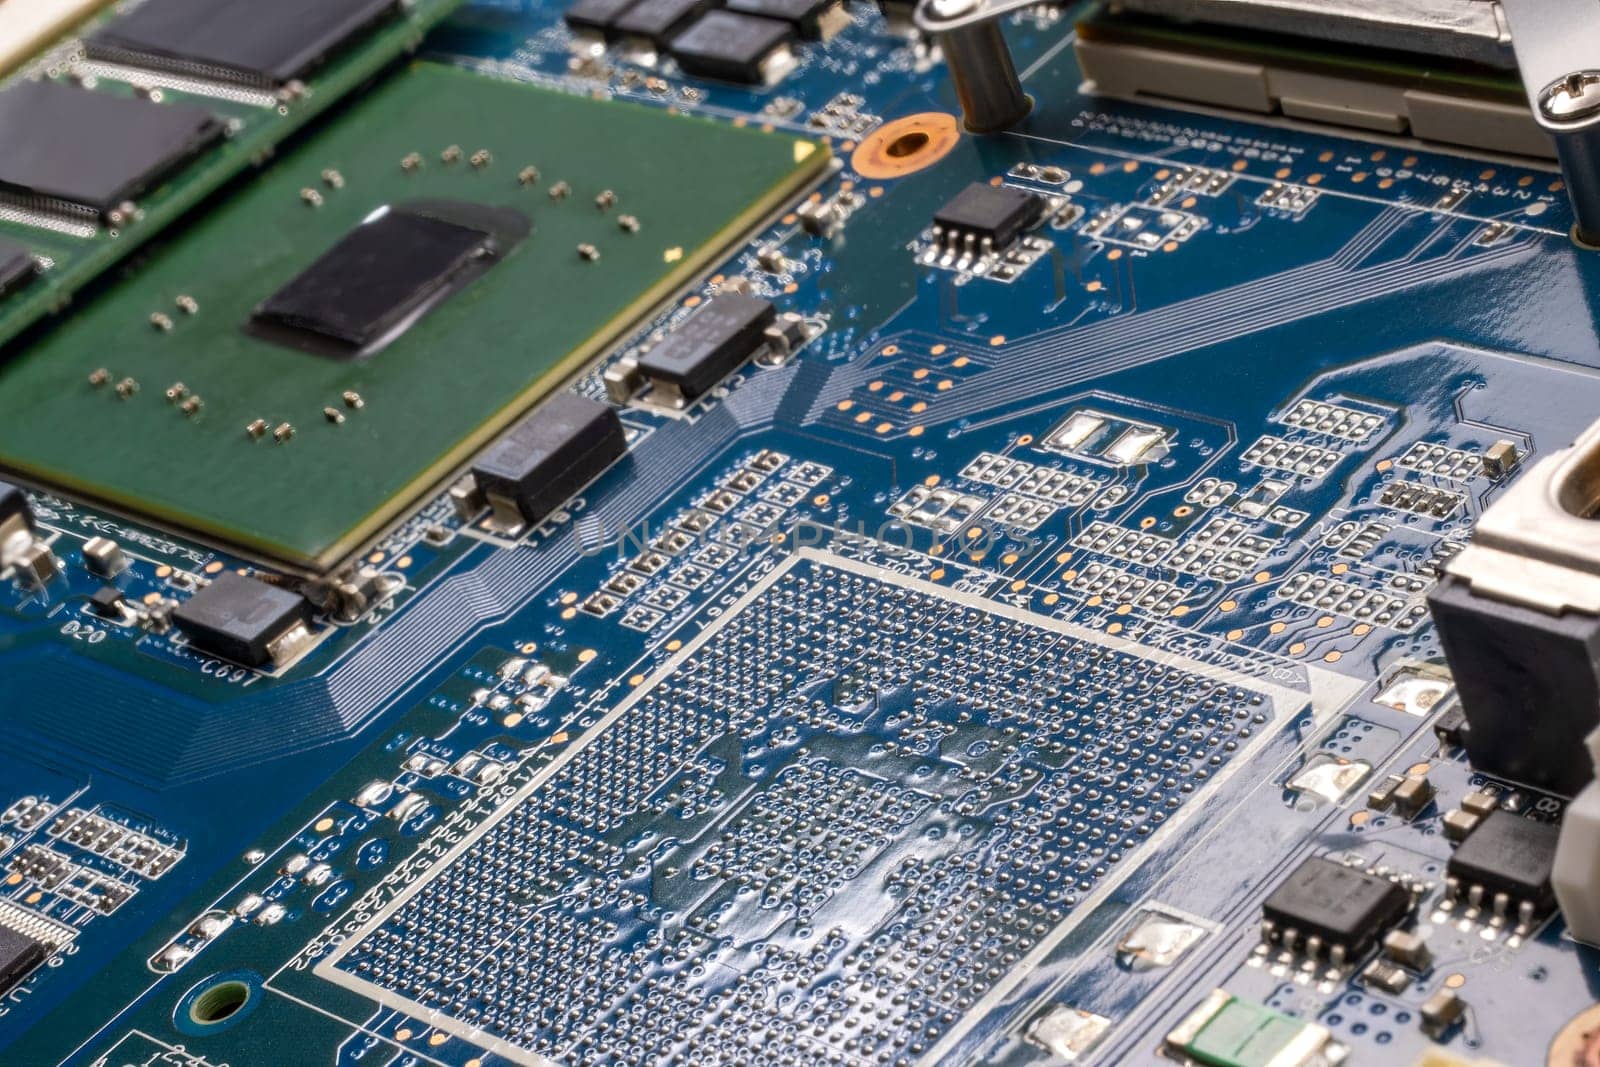 Tight close up of a bluegreen sheen of laptop motherboard with chipsets on it by bRollGO